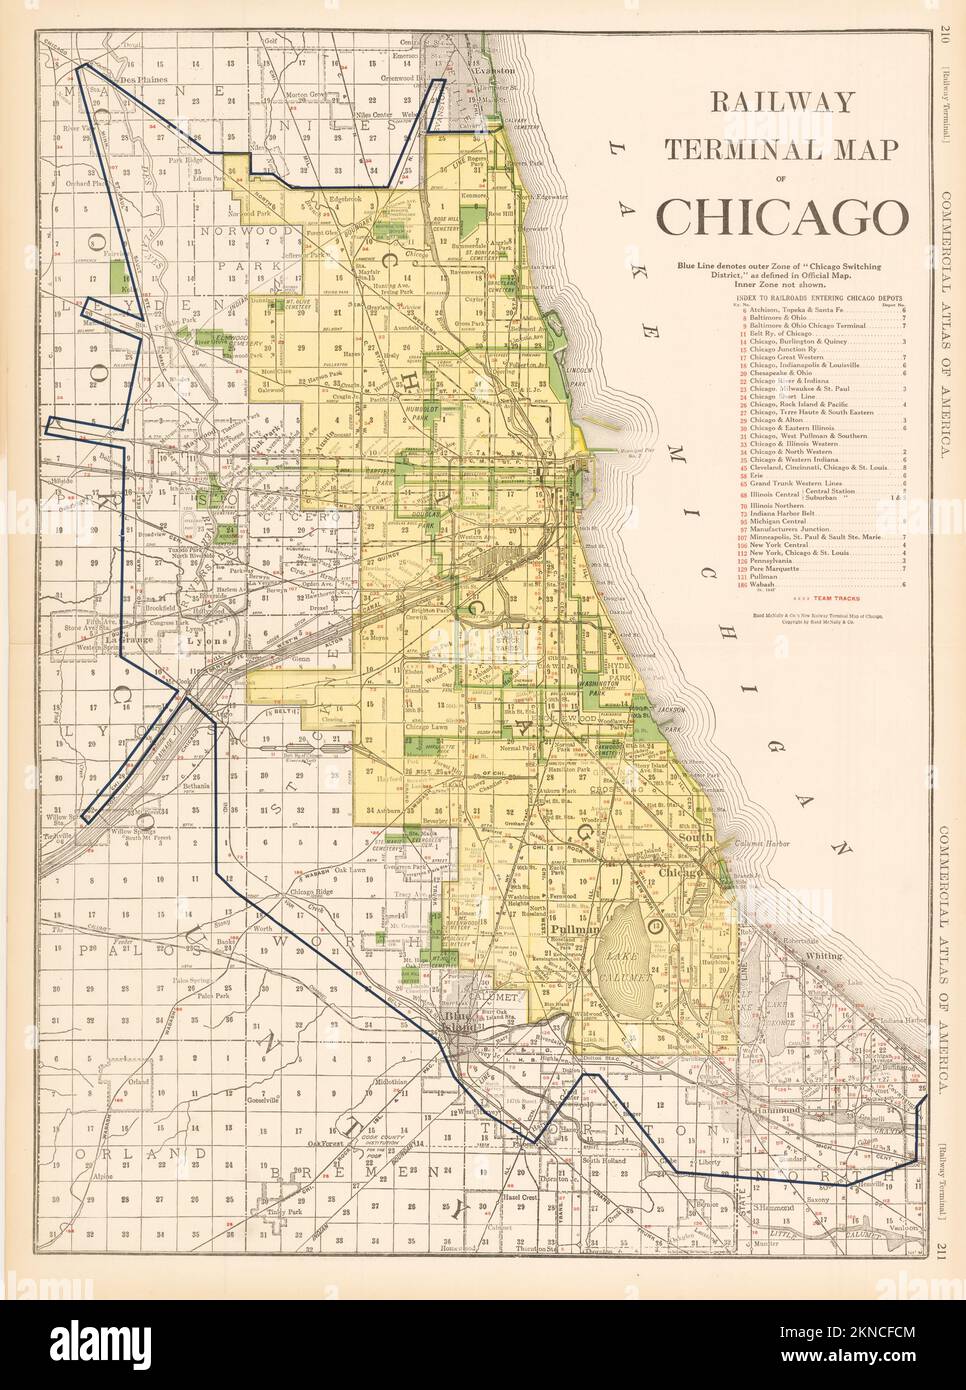 Vintage city plan of Chicago and area around it from 20th century. Maps are beautifully hand illustrated and engraved showing it at the time. Stock Photo